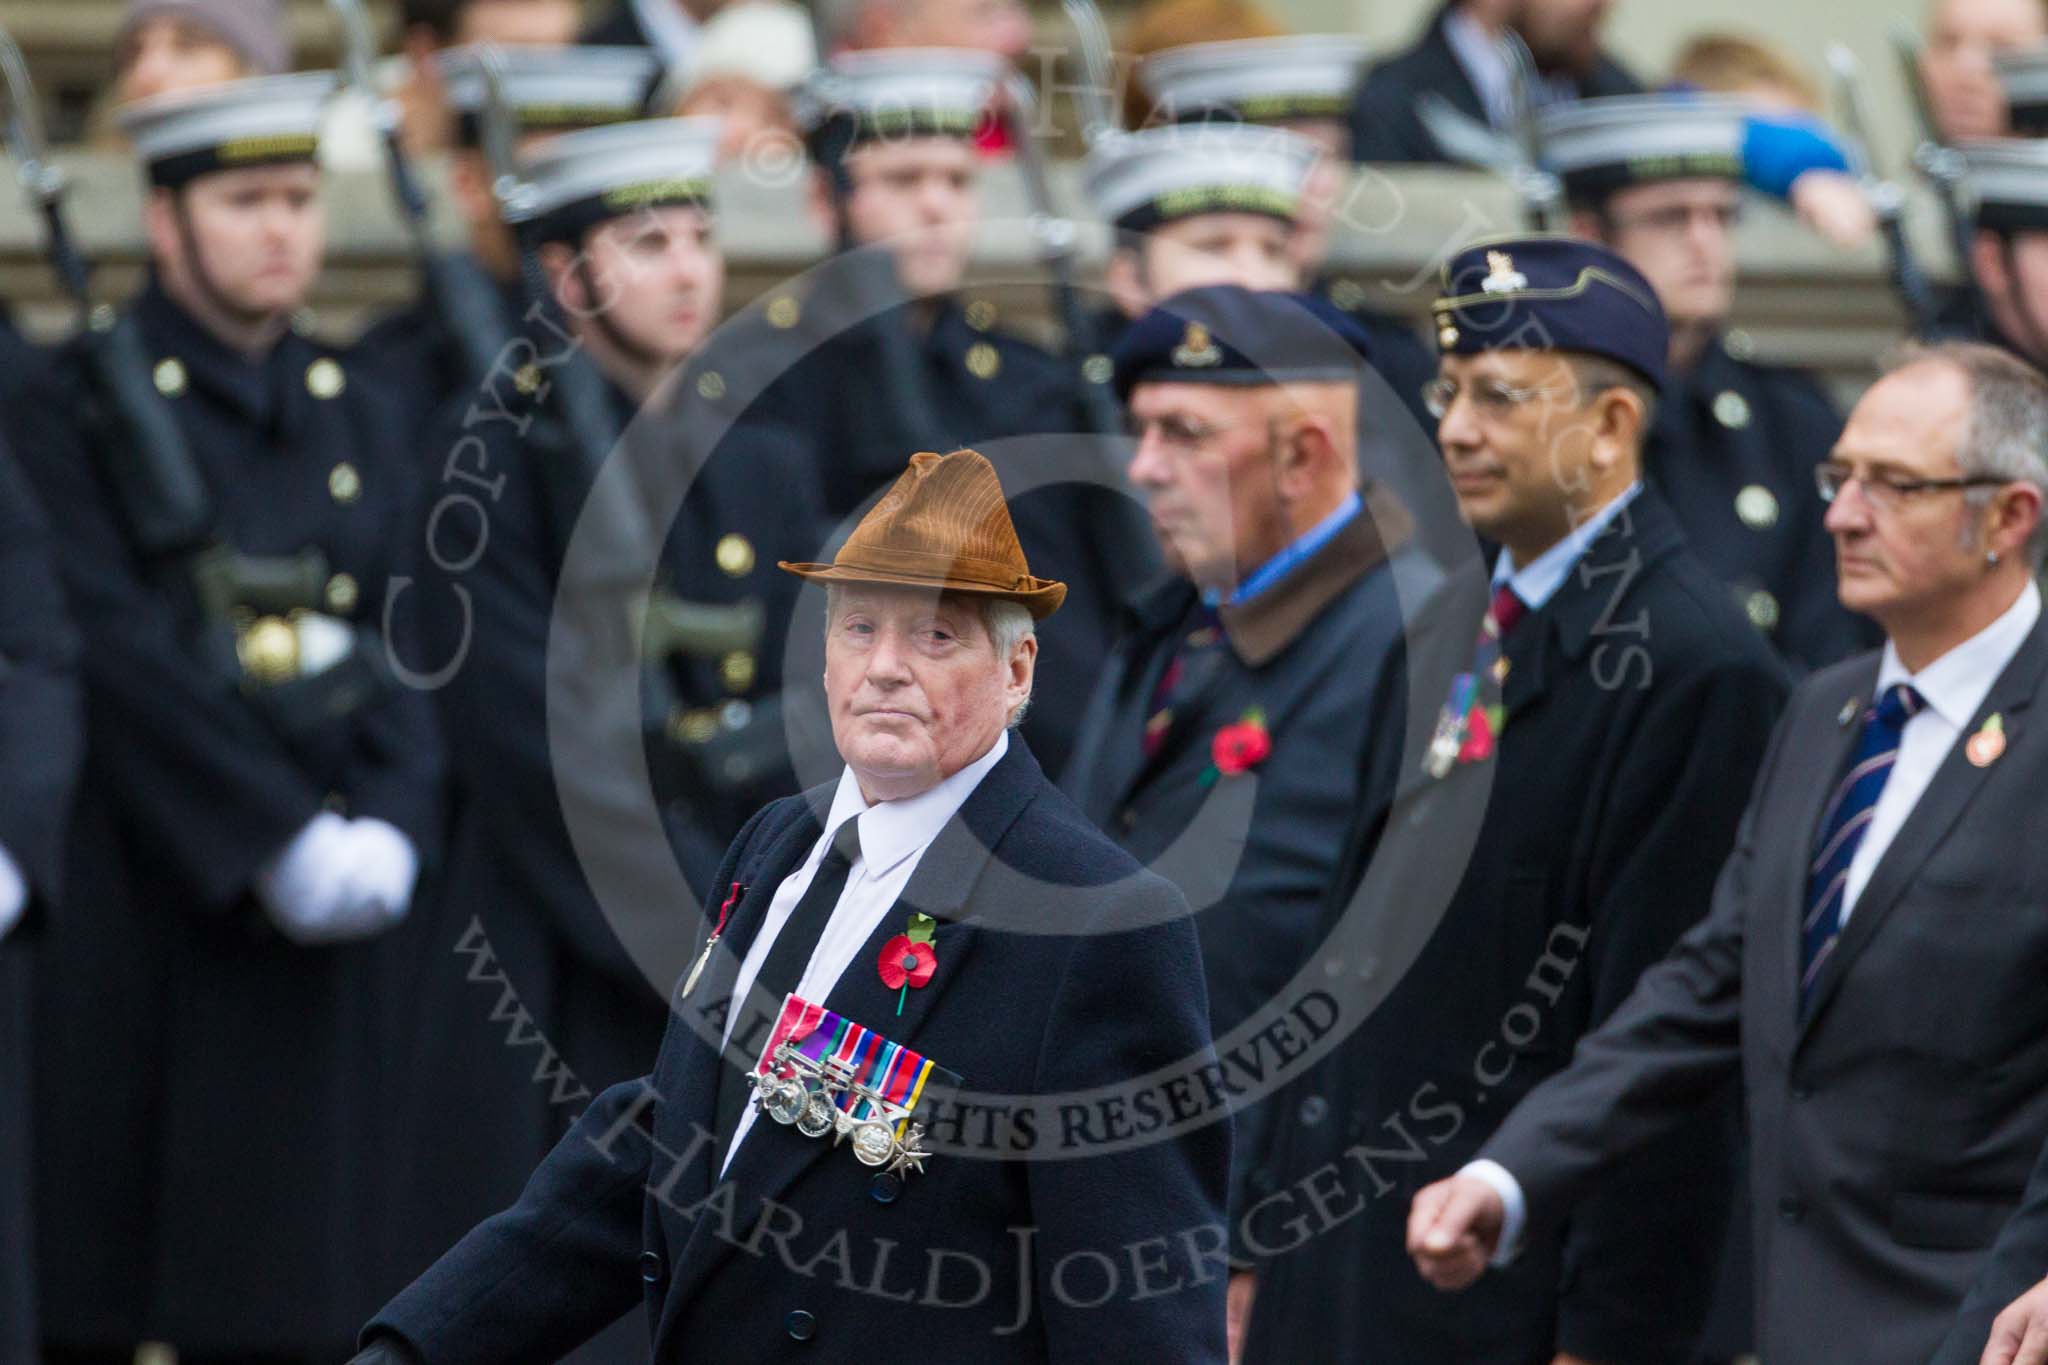 Remembrance Sunday at the Cenotaph 2015: Group B17, The RAEC and ETS Branch Association.
Cenotaph, Whitehall, London SW1,
London,
Greater London,
United Kingdom,
on 08 November 2015 at 11:40, image #141